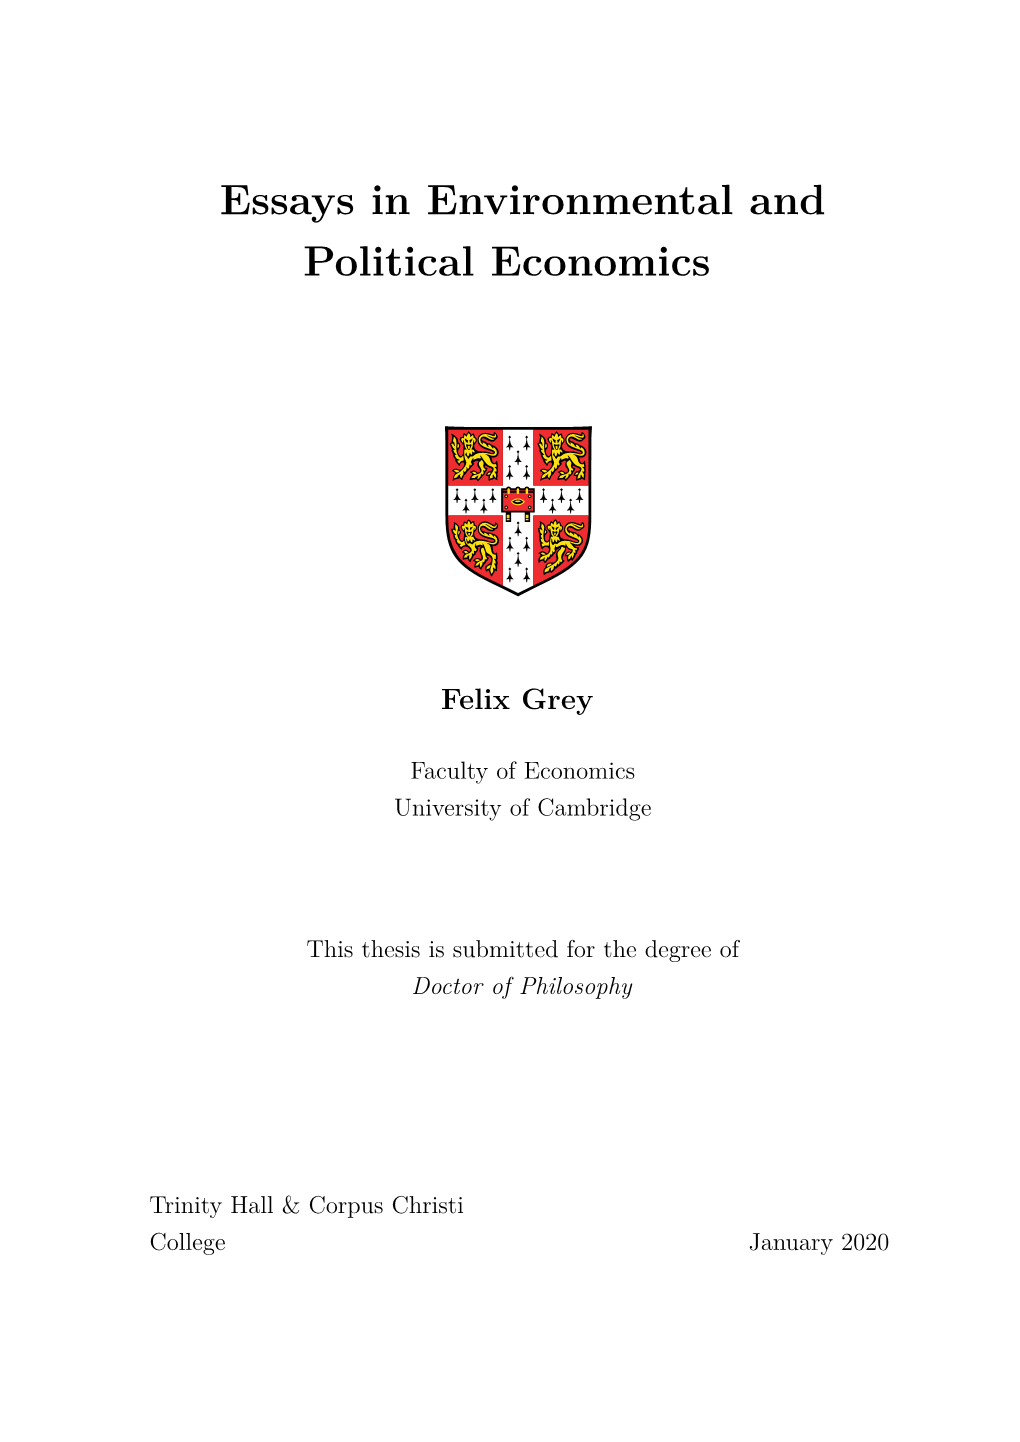 Essays in Environmental and Political Economics